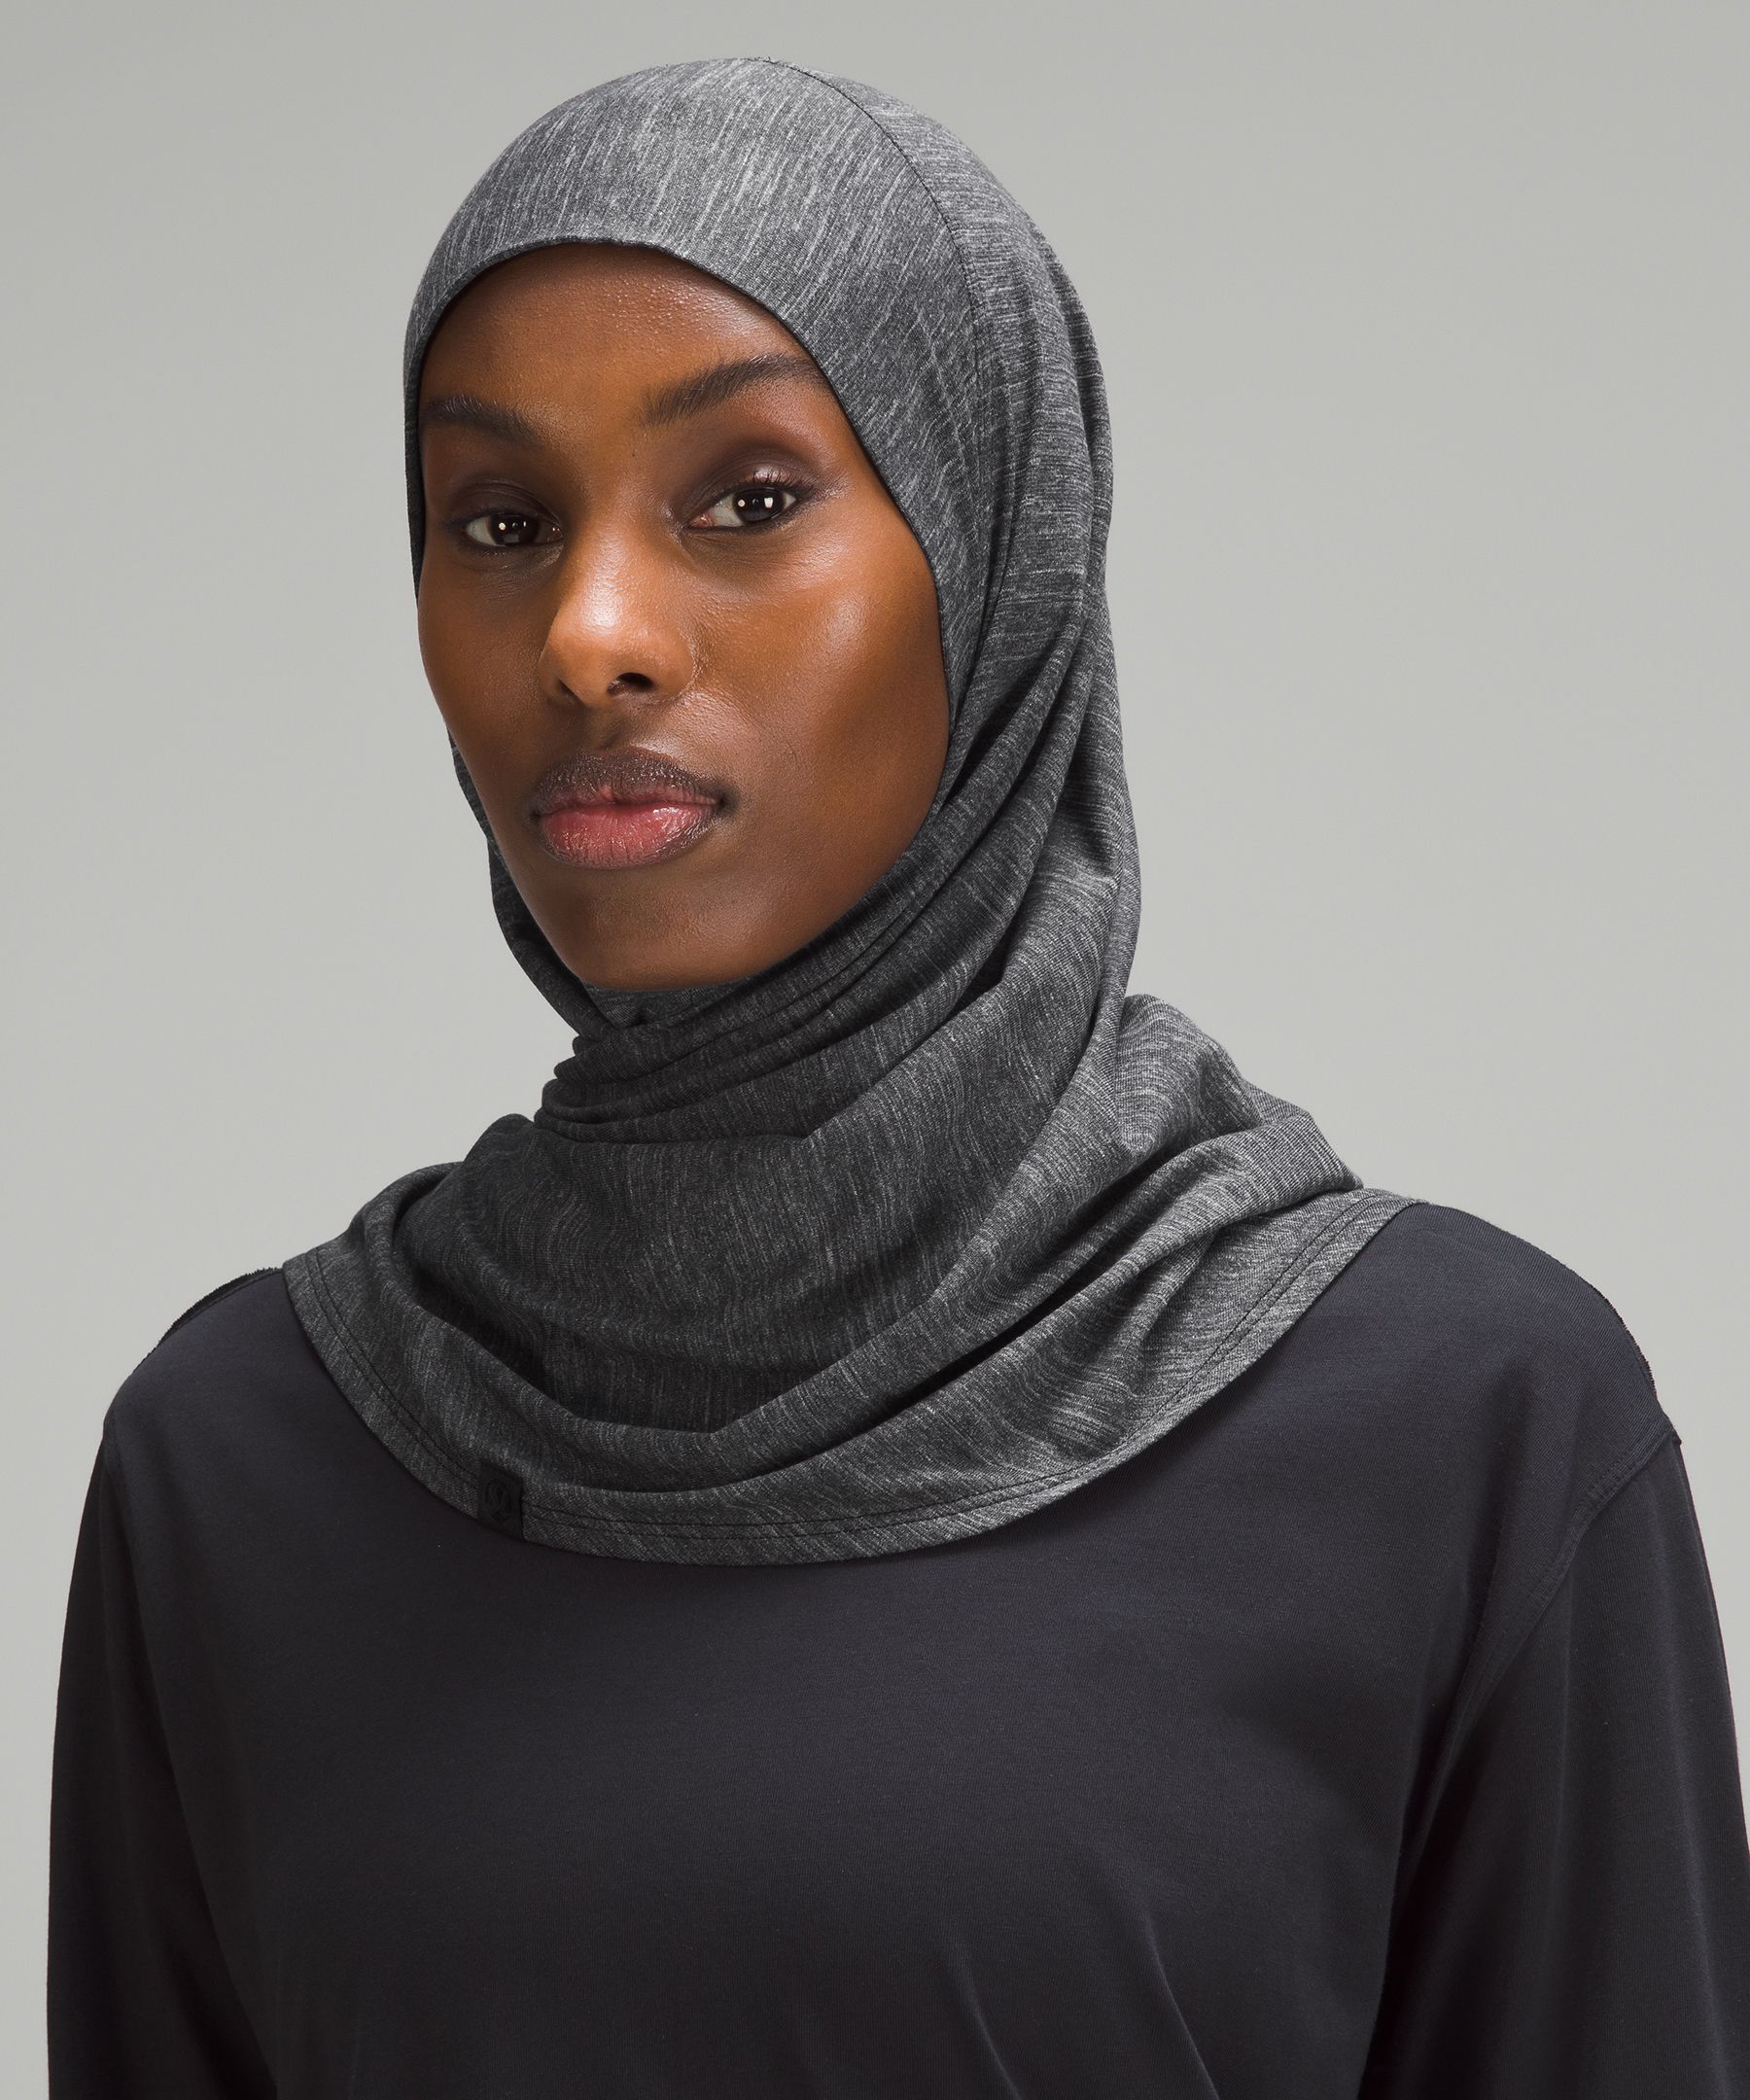 Women's Pull-On-Style Hijab, Women's Accessories